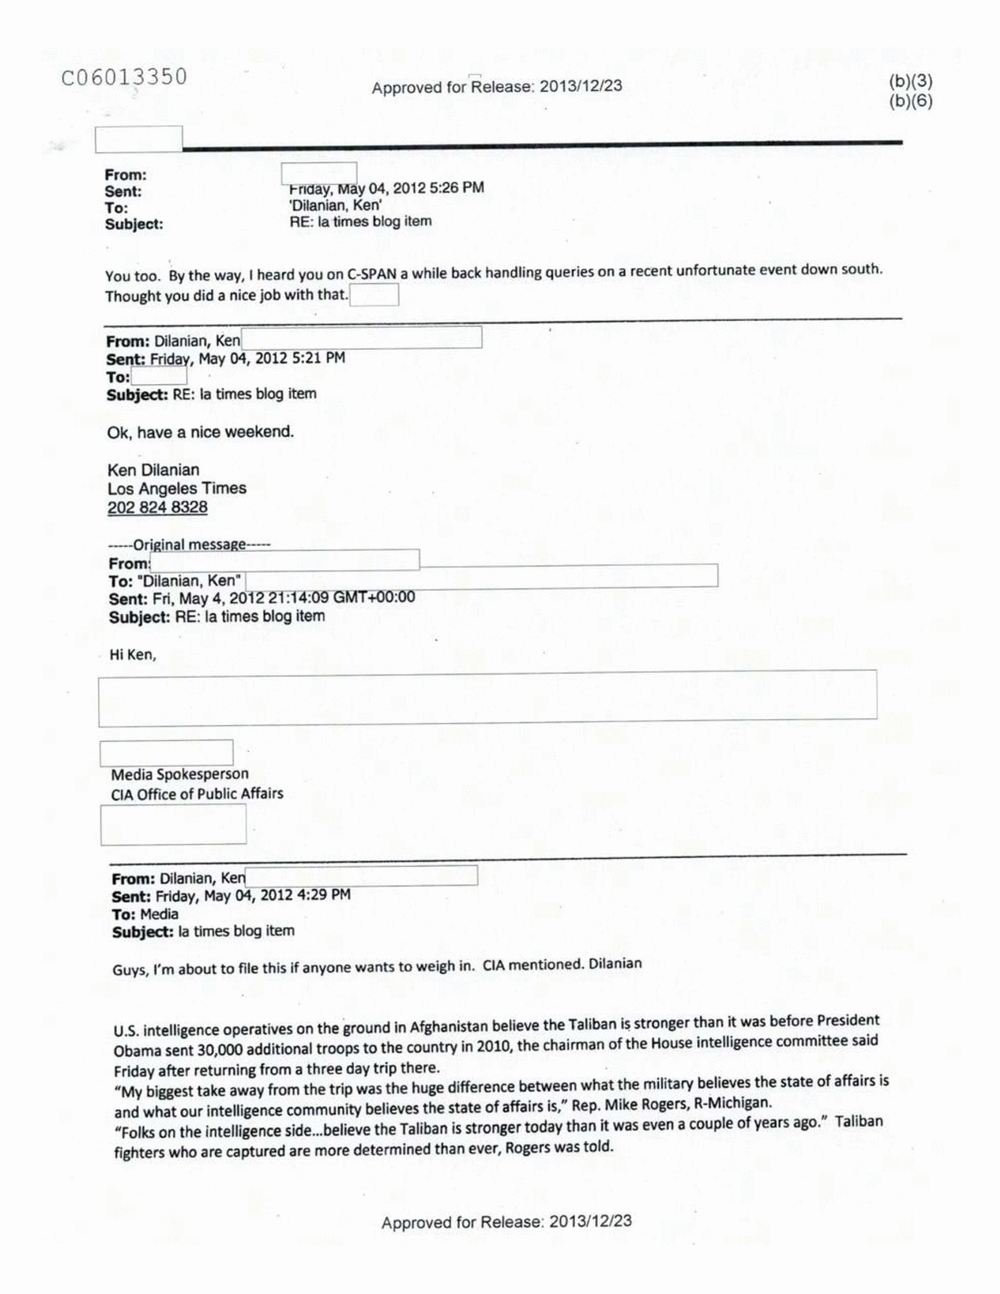 Page 263 from Email Correspondence Between Reporters and CIA Flacks